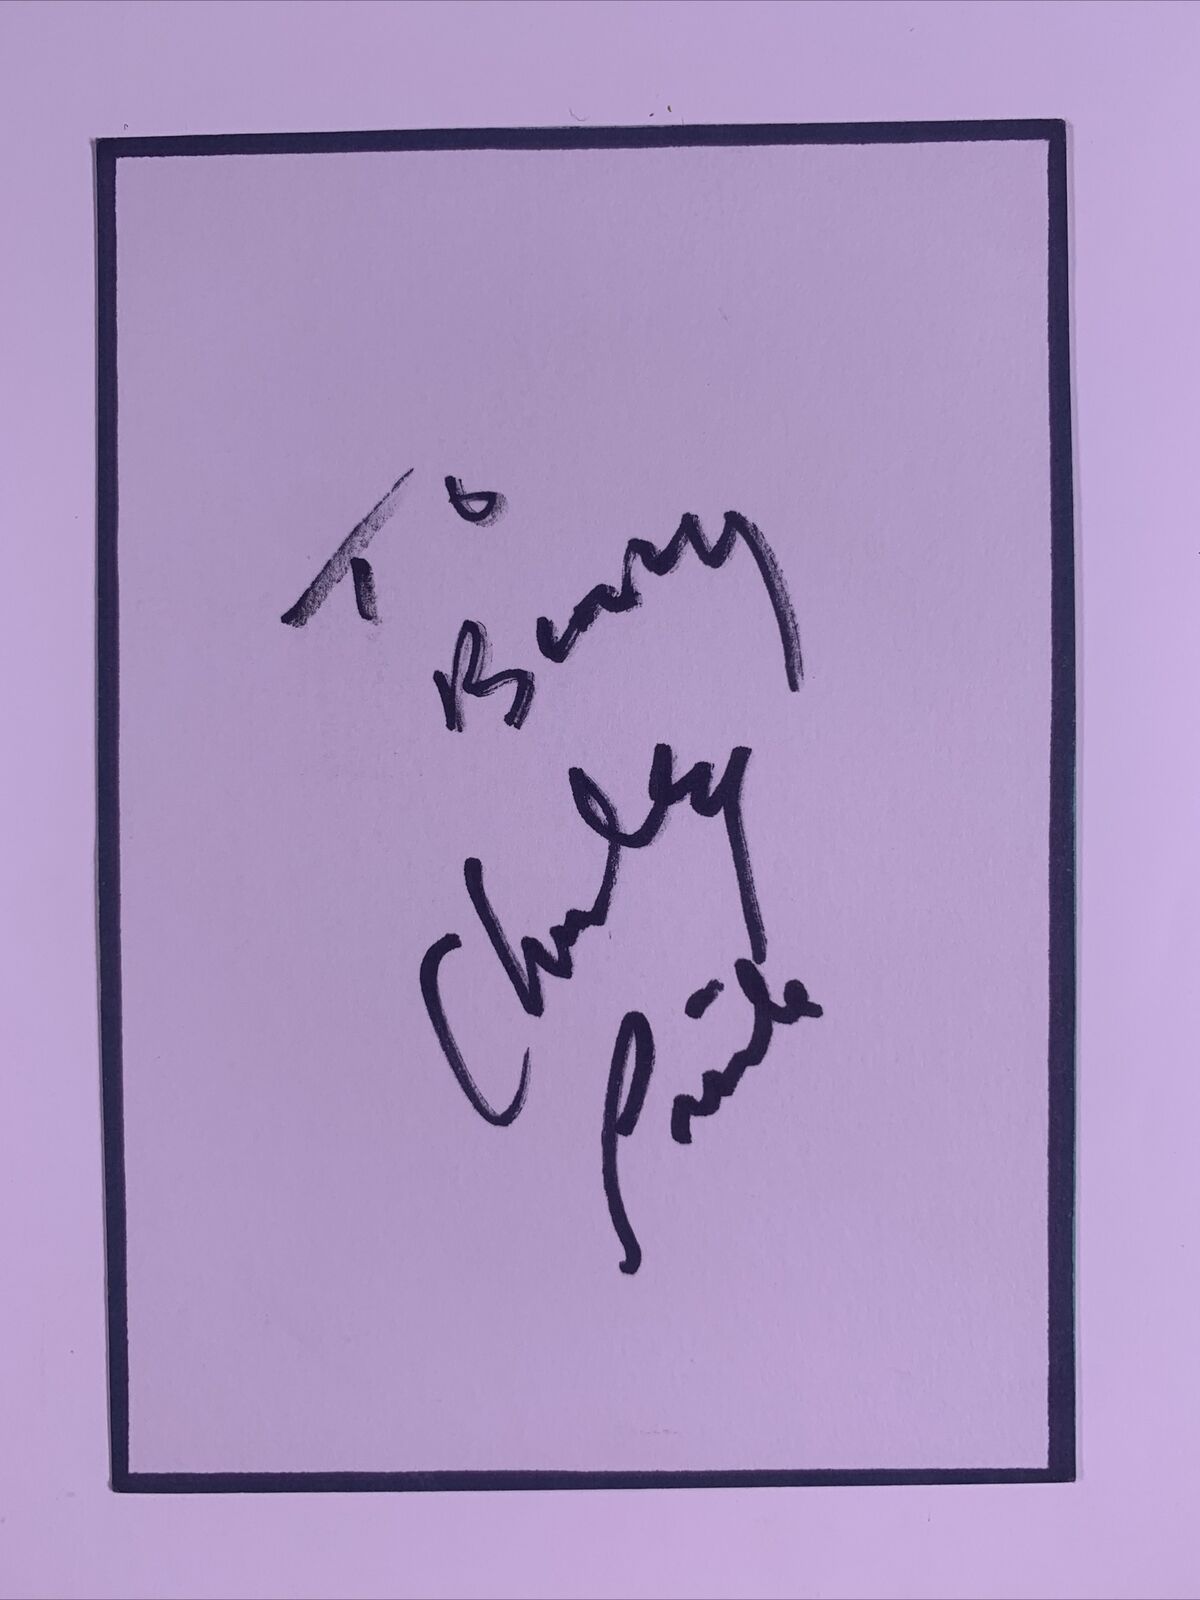 Charley Pride Signed Card Original Authentic From The Collection Of Barry M